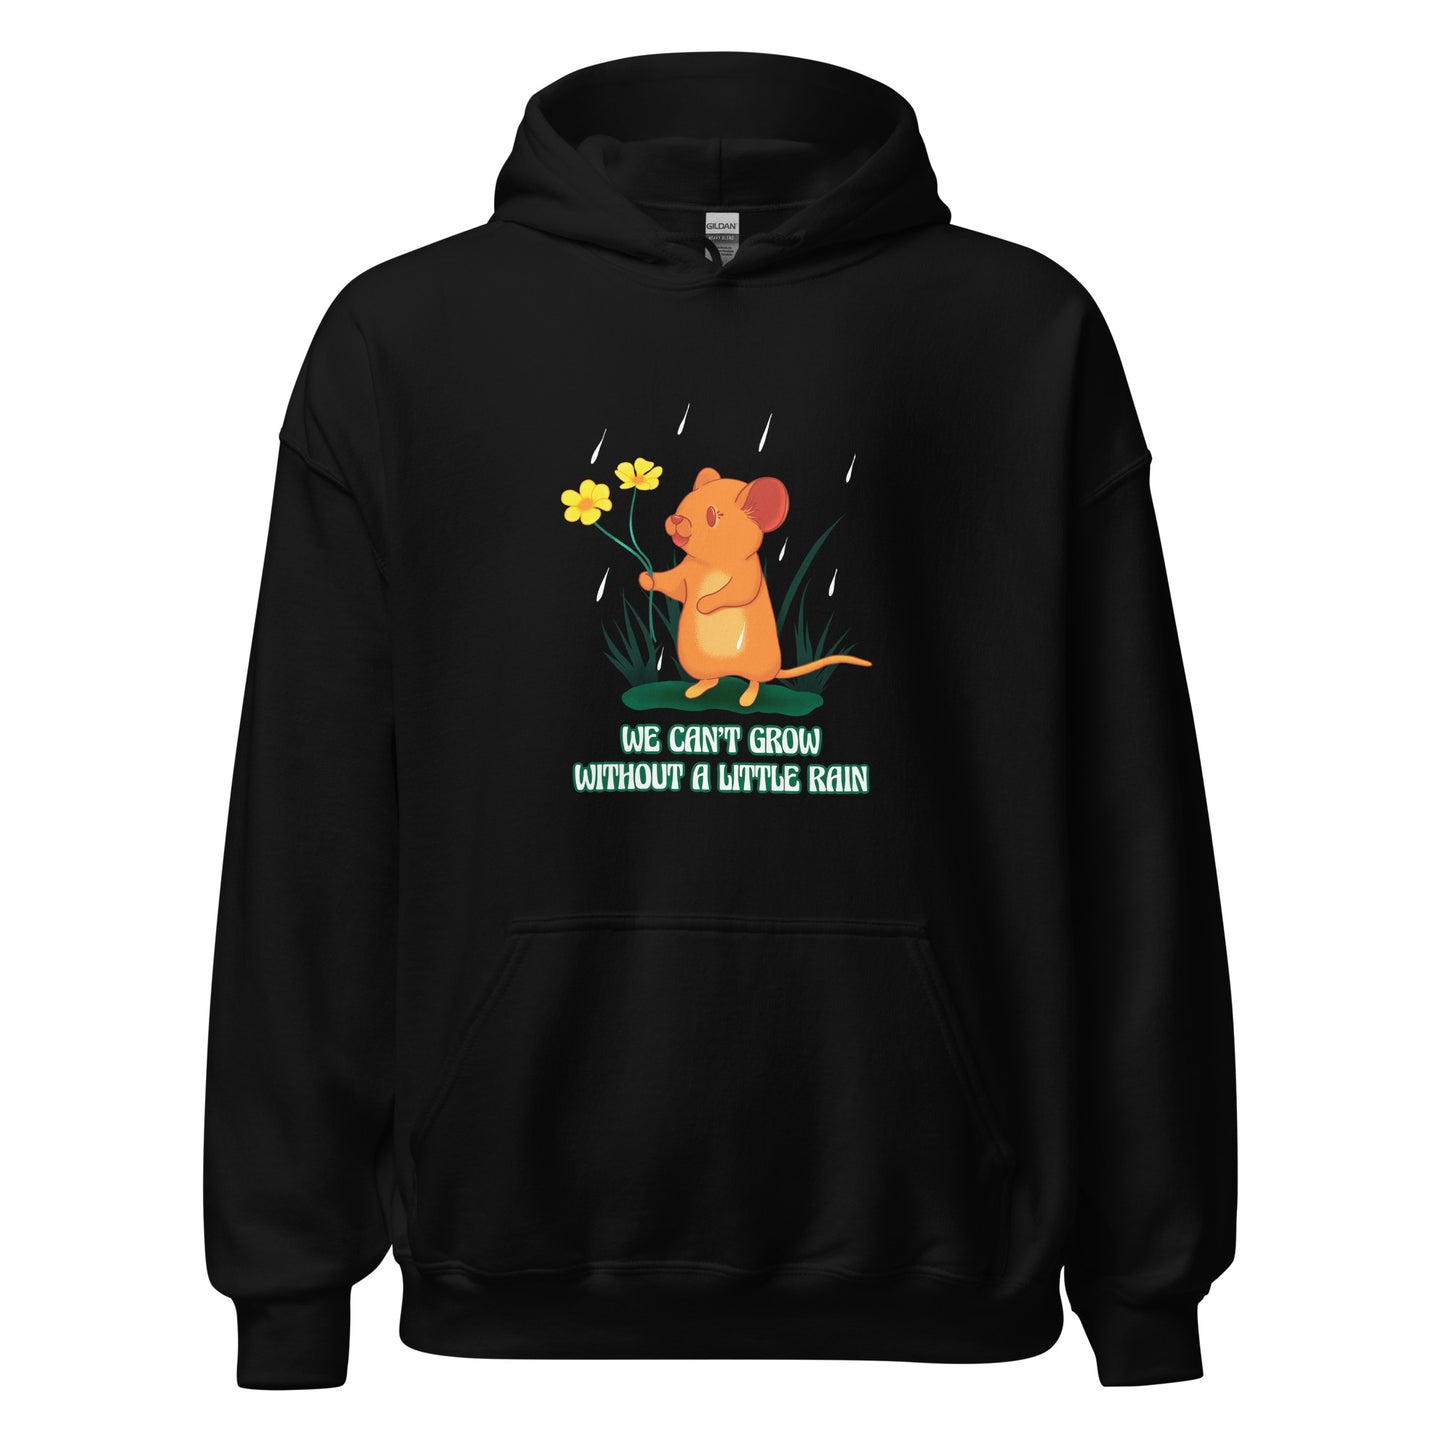 Can't Grow Without Rain Hoodie Pullover